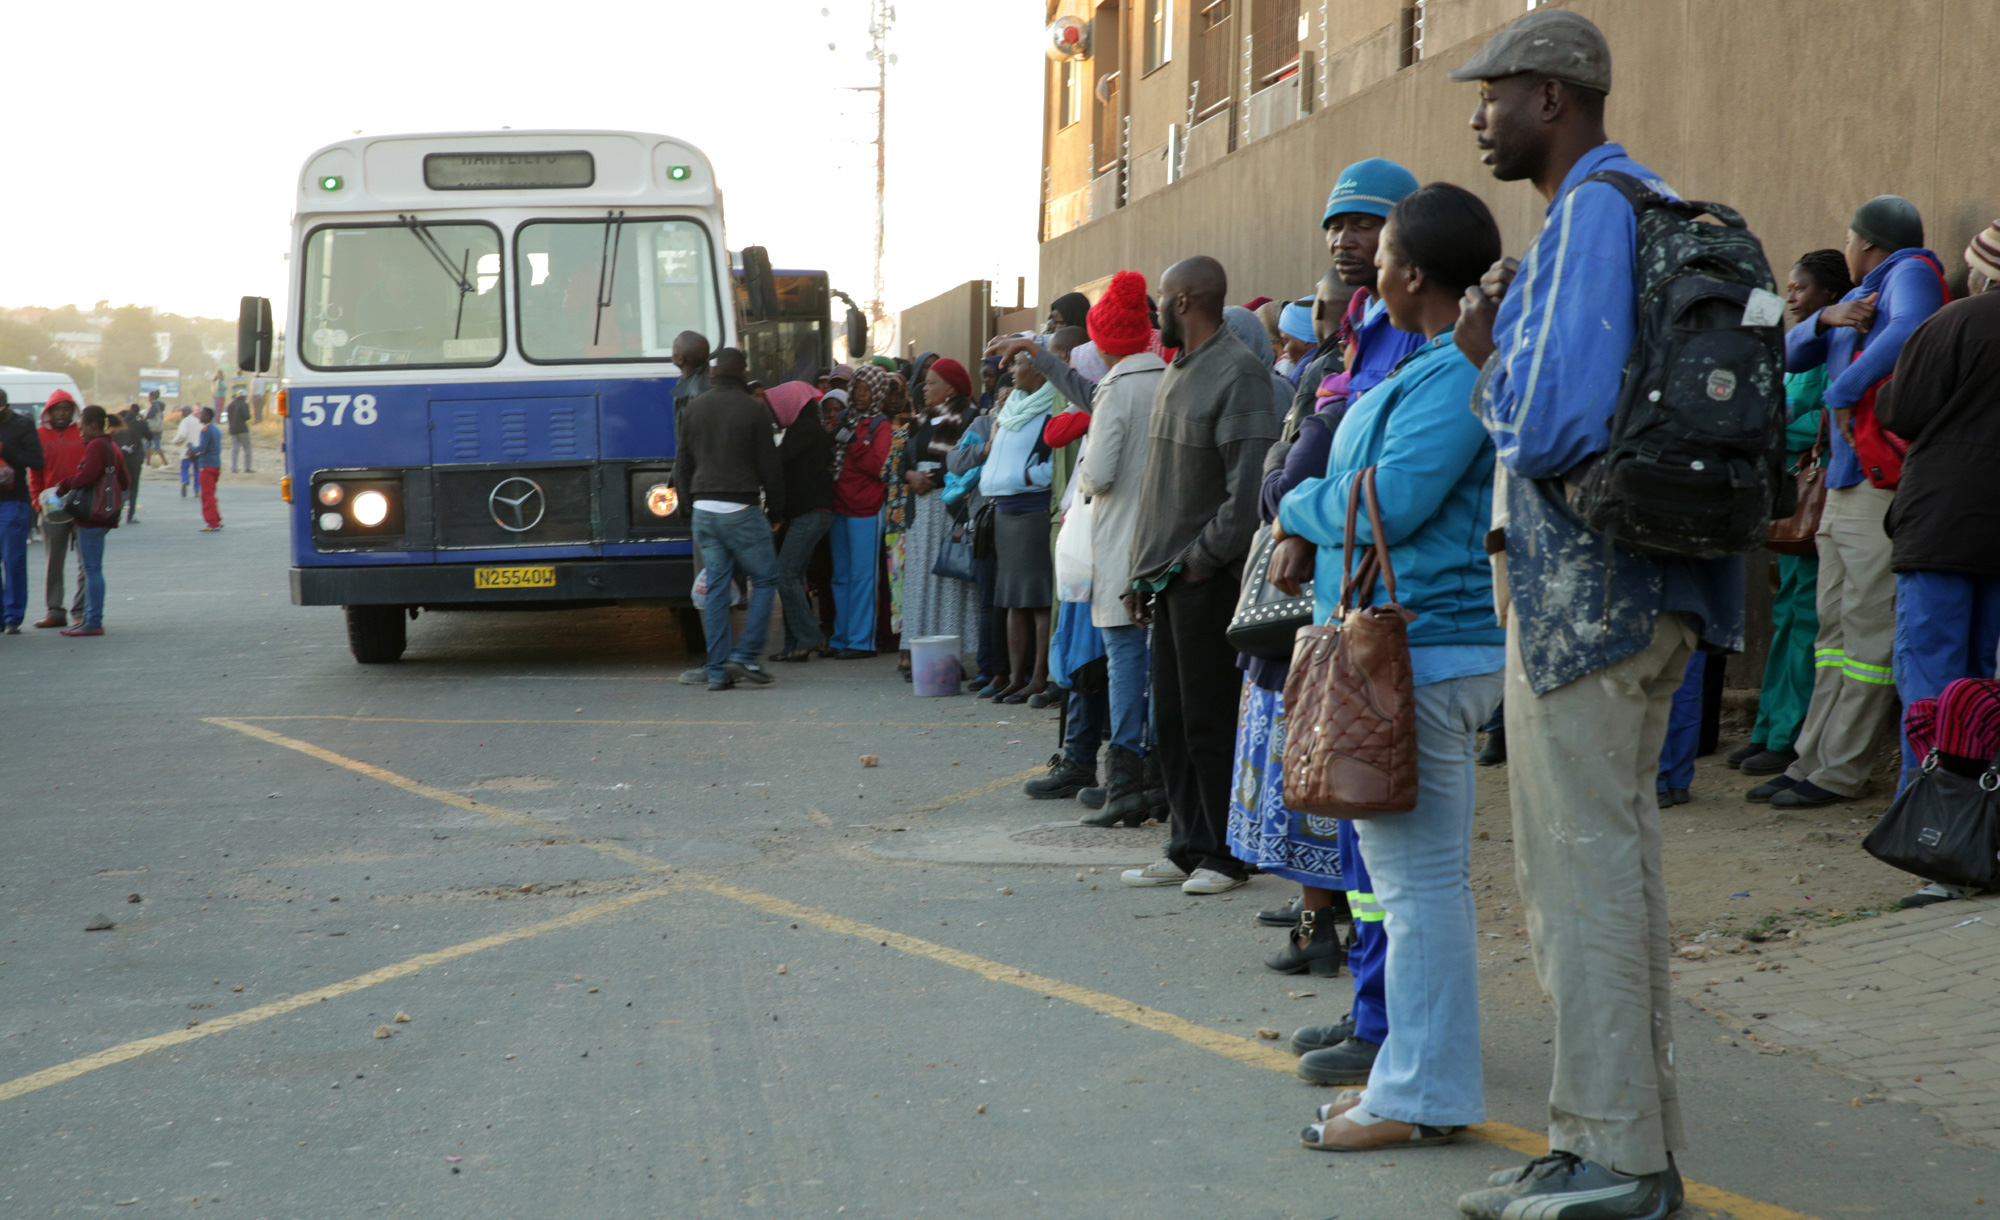 The new bus stops are well received by the population in Windhoek. “There used to be only a starting point and a destination, no stops in-between.“ 